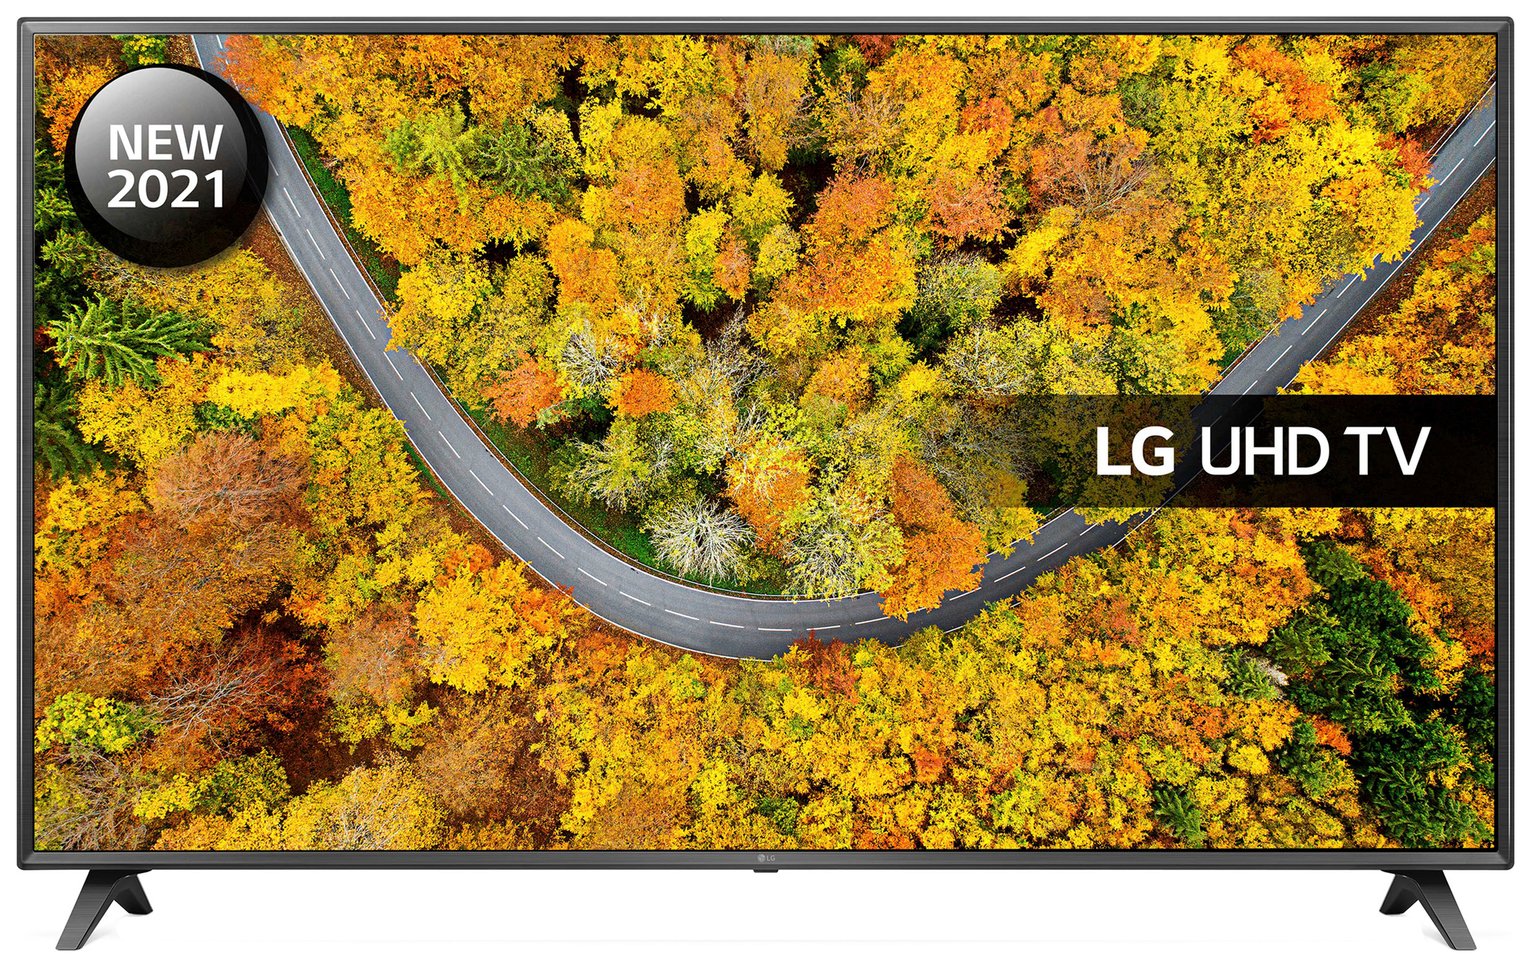 LG 43 Inch 43UP75006LF Smart 4K UHD HDR LED Freeview TV